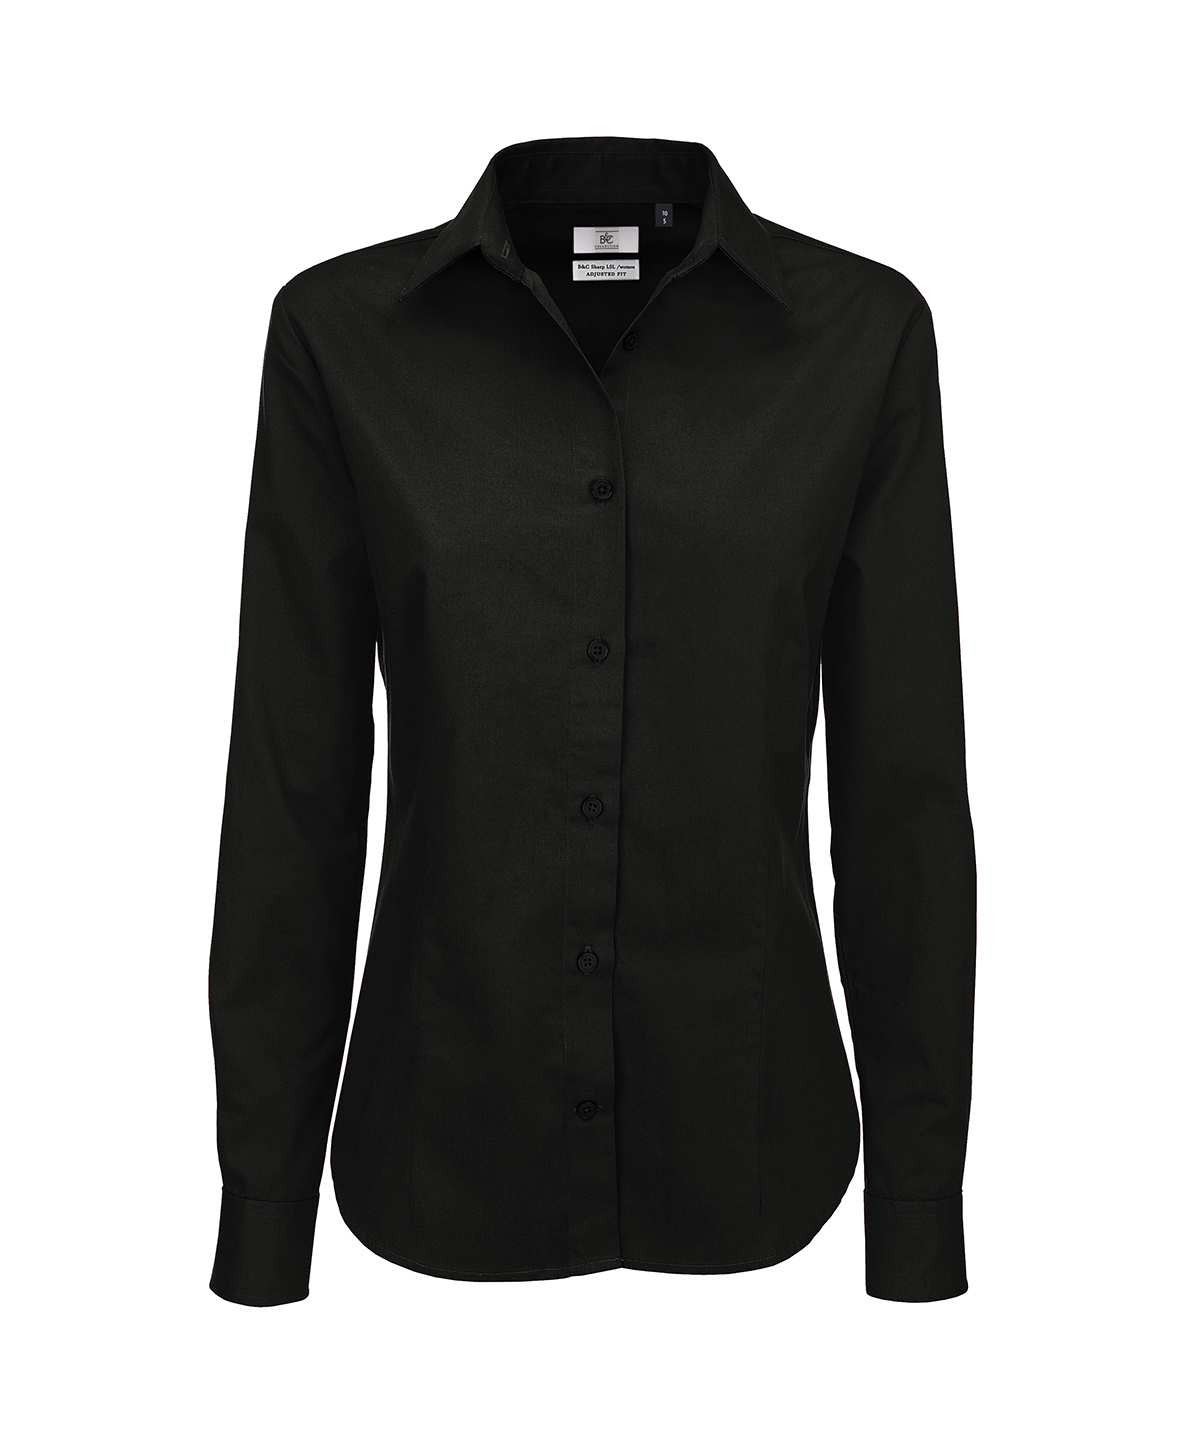 B&C Collection B & C Collection Women's Sharp Long Sleeve Blouse B712F